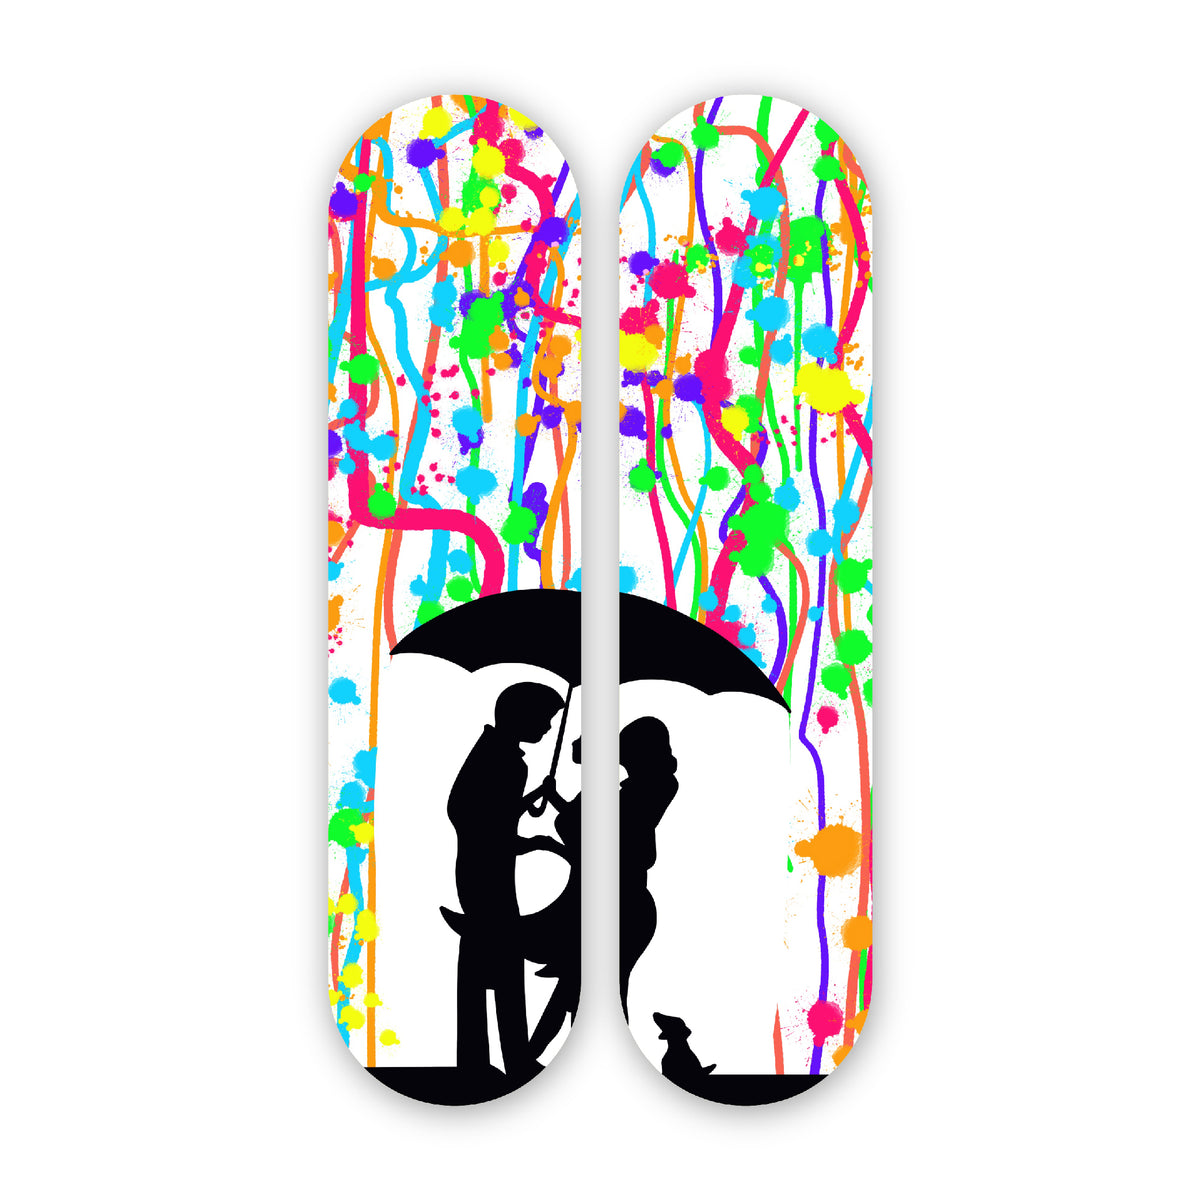 2-Piece Wall Art of Raining Colors Skateboard Design in Acrylic Glass - Positive Vibes